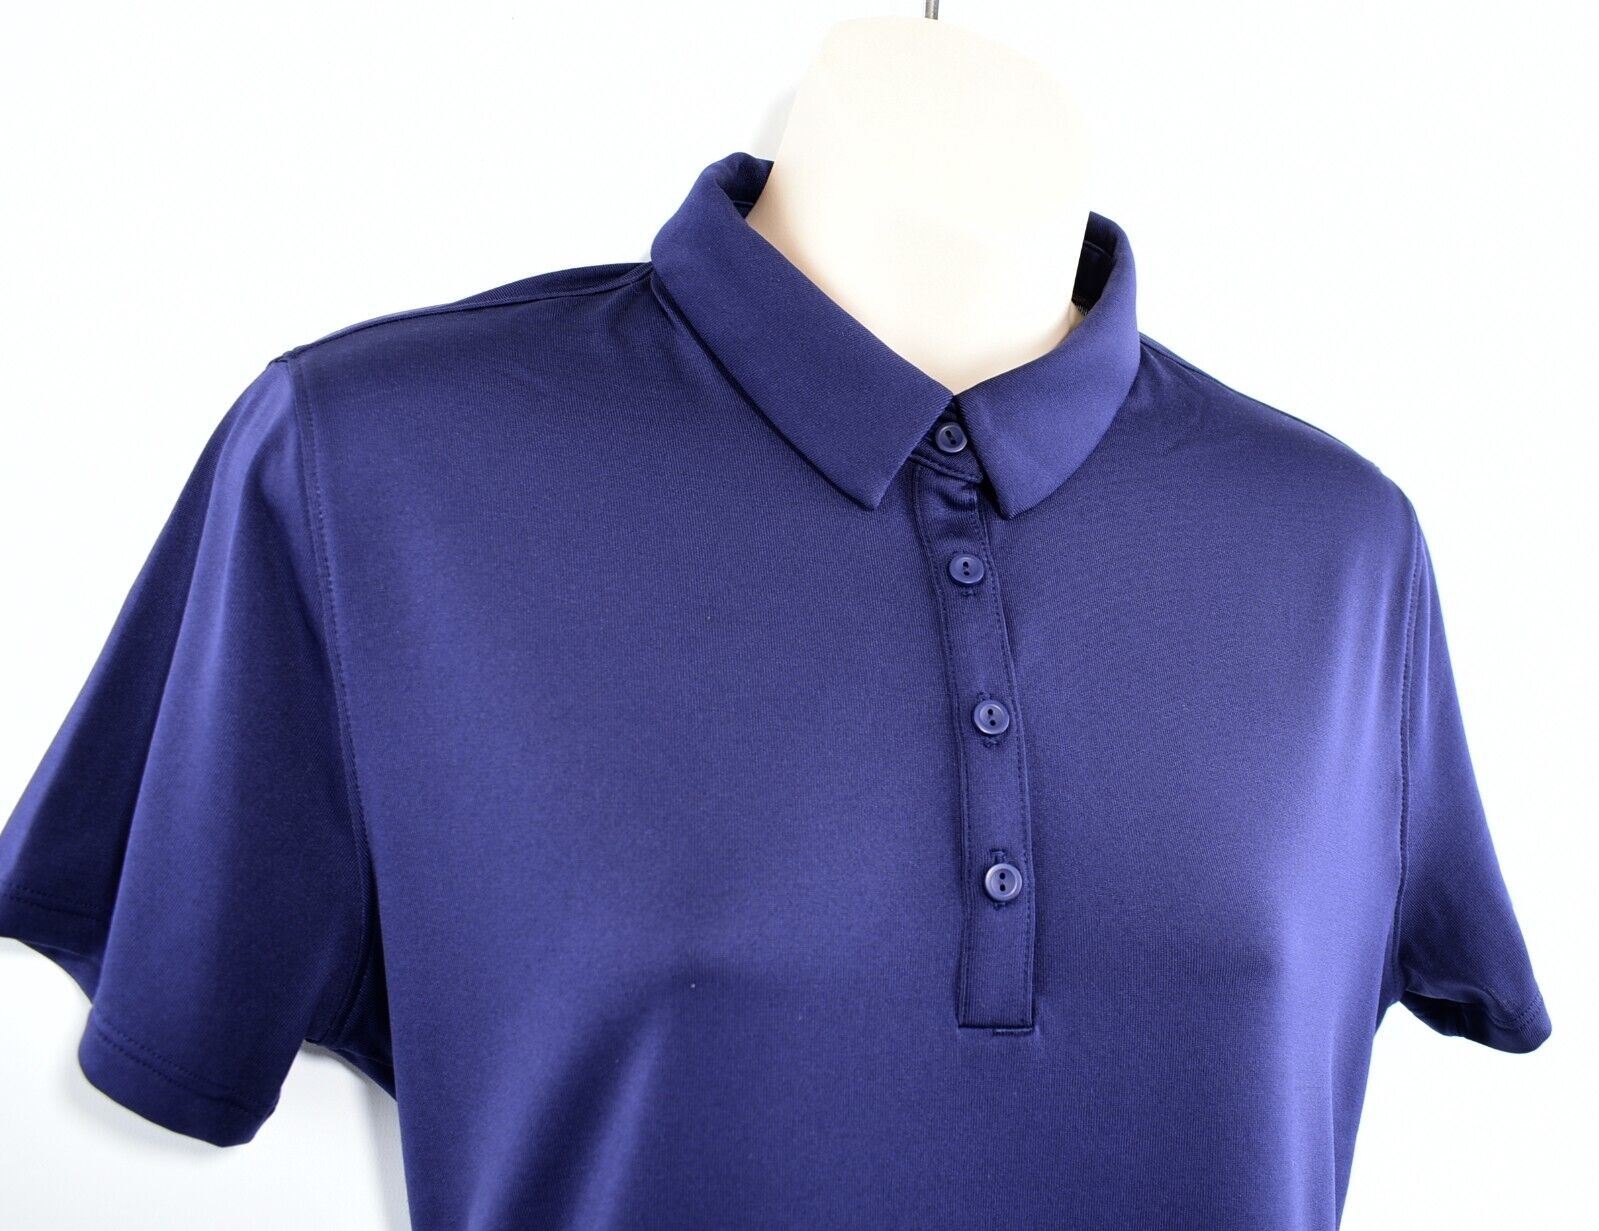 UNDER ARMOUR Womens ZINGER Polo Shirt, Fitted Style, Navy Blue, size M /UK 12